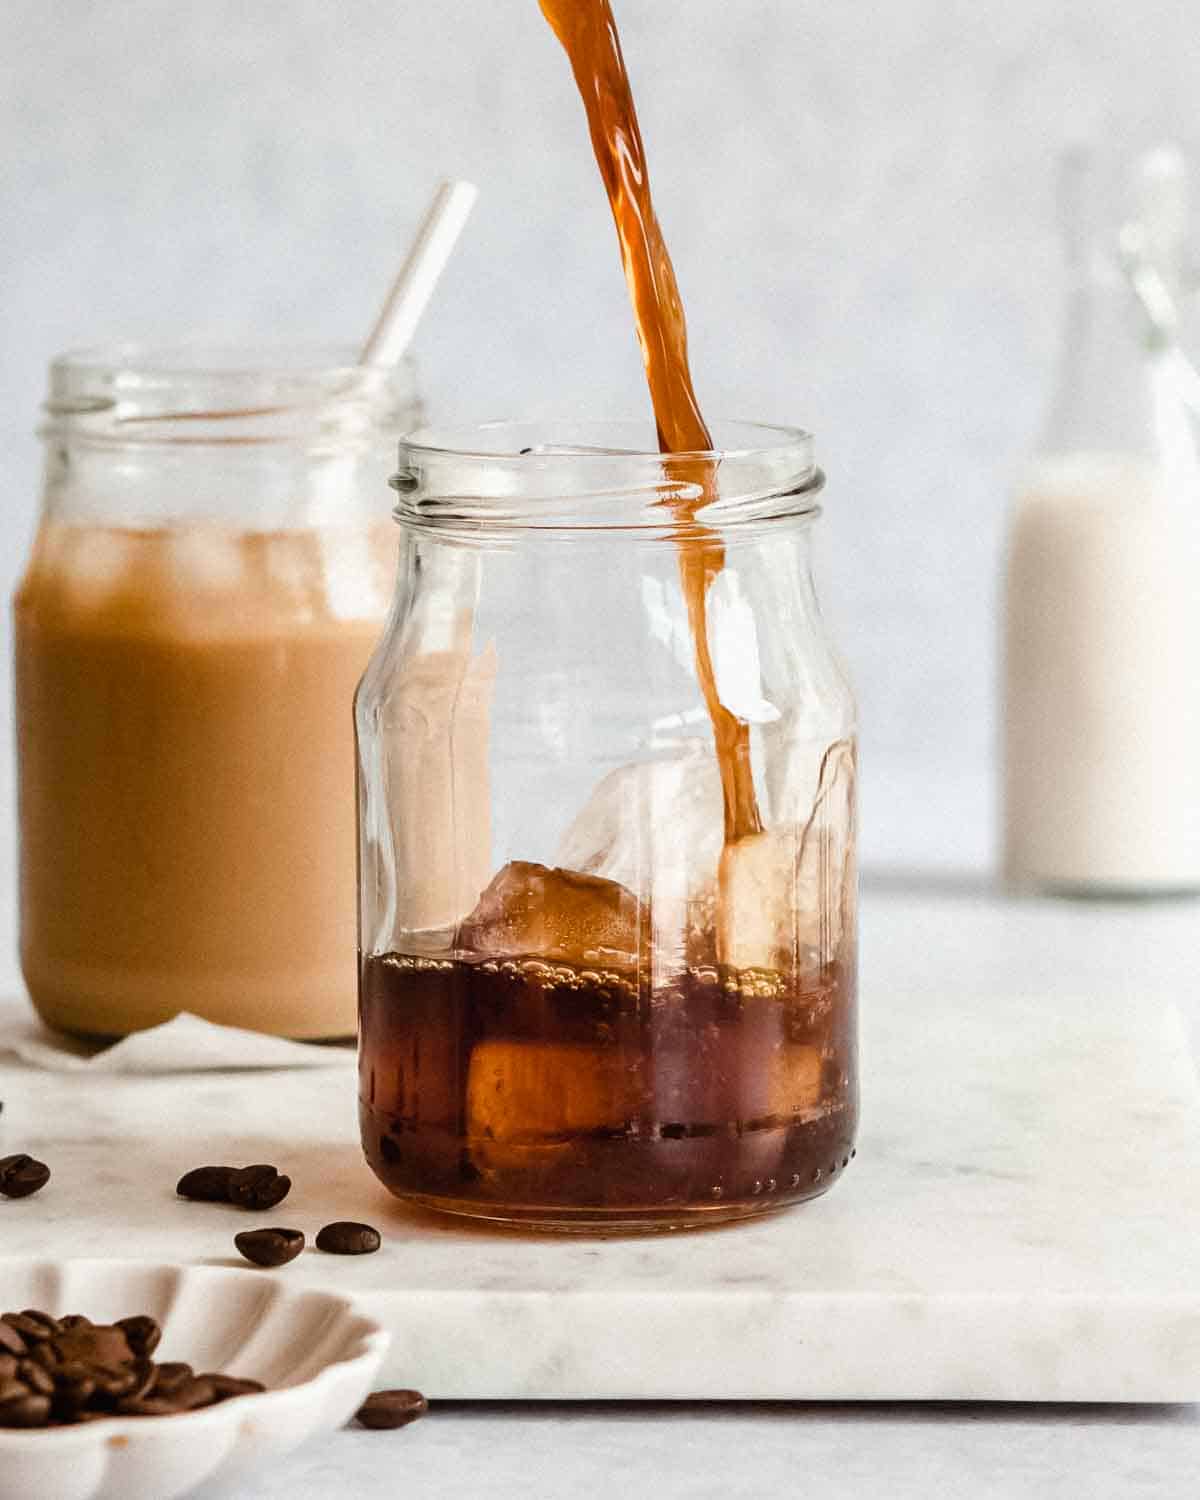 cold brew coffee being added to a serving glass filled with ice.